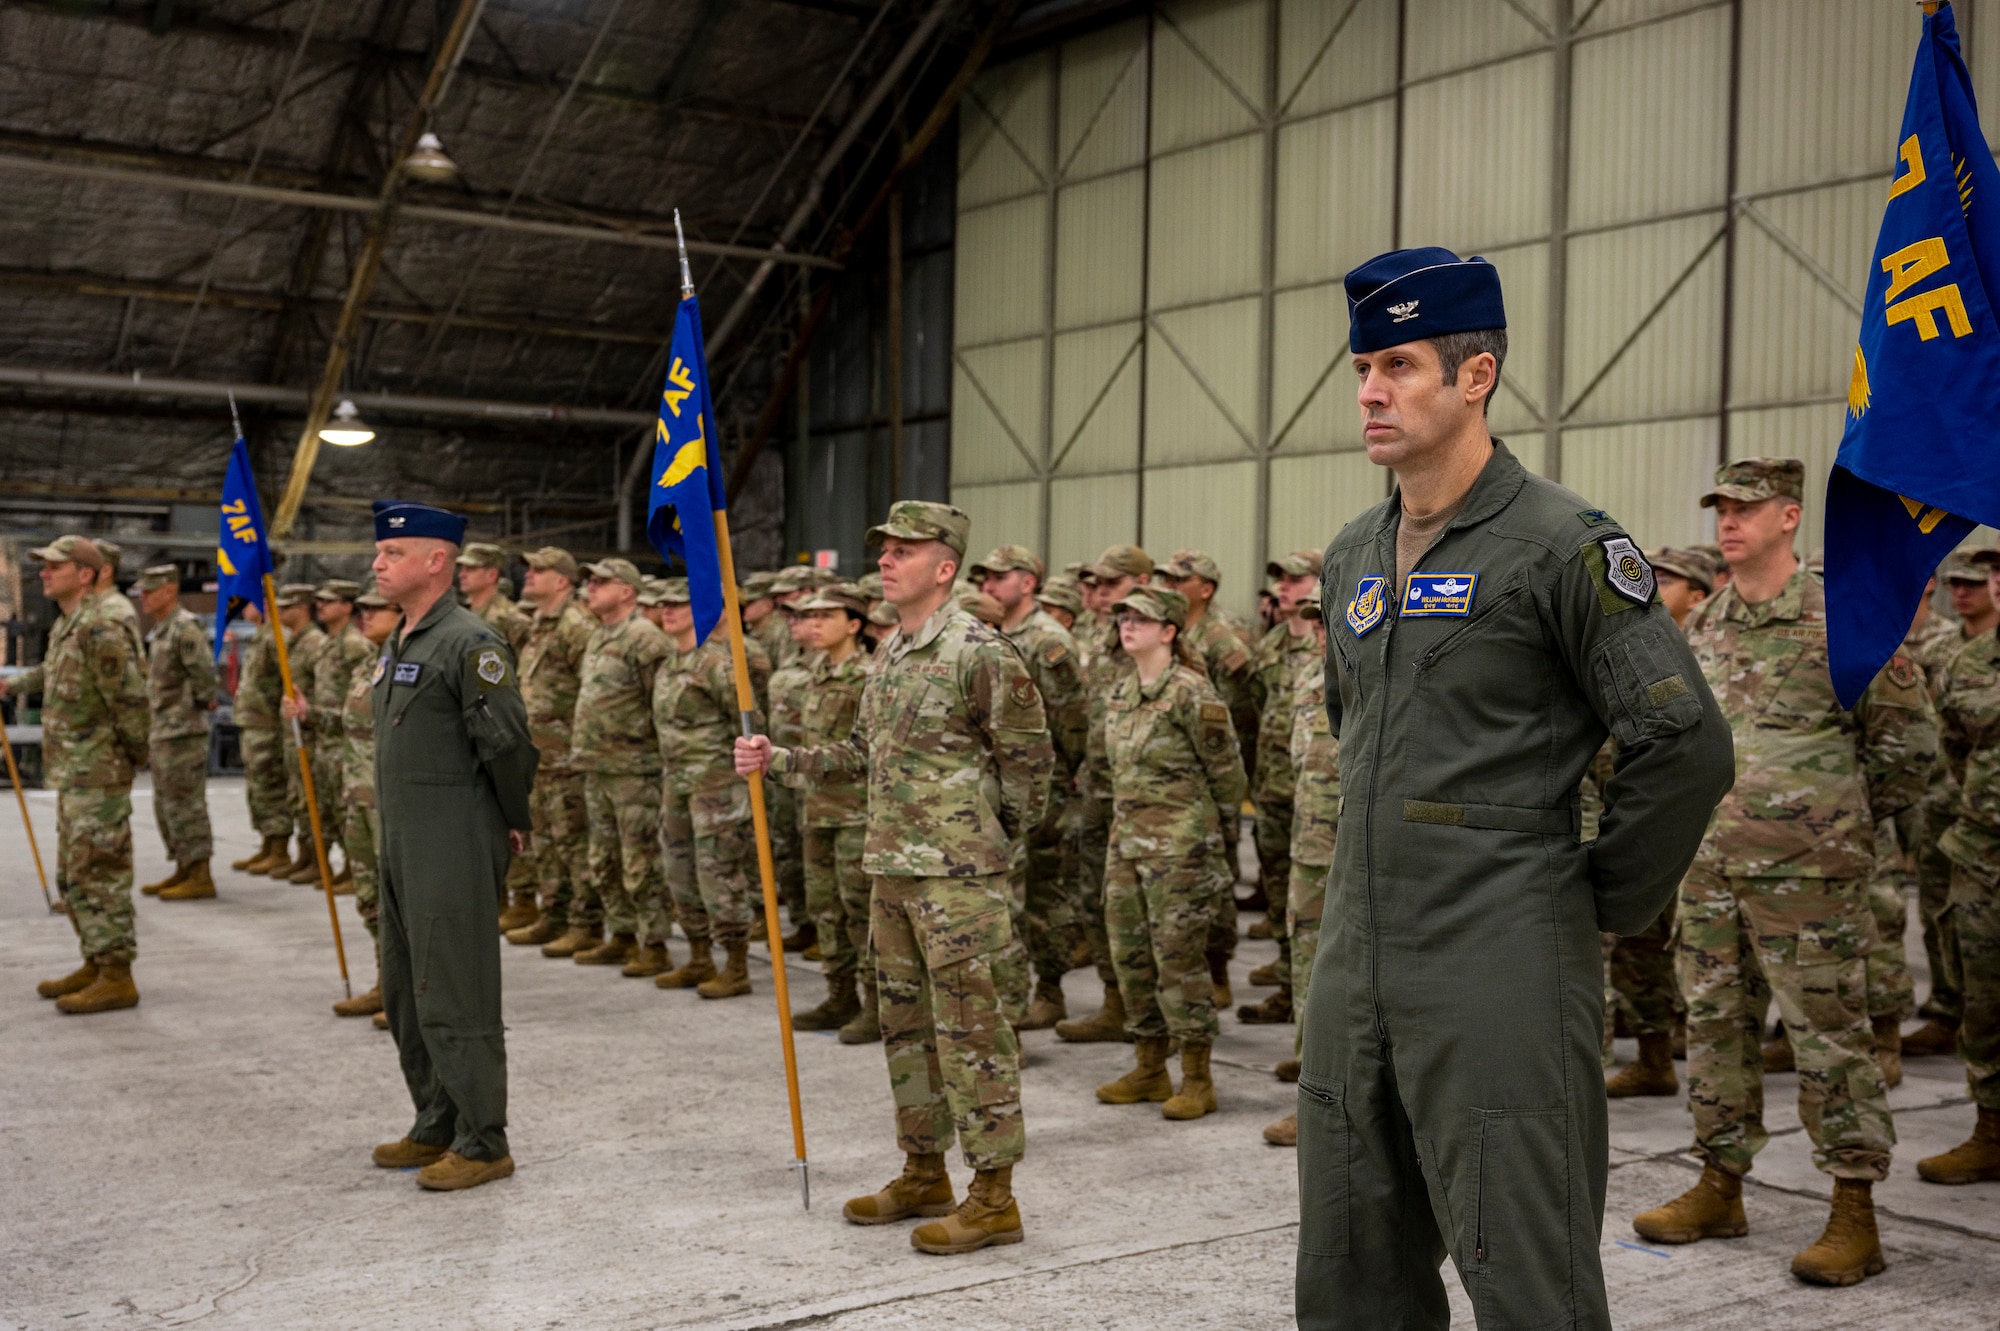 U.S. service members stand in formation during the Seventh Air Force change of command ceremony at Osan Air Base, Republic of Korea.